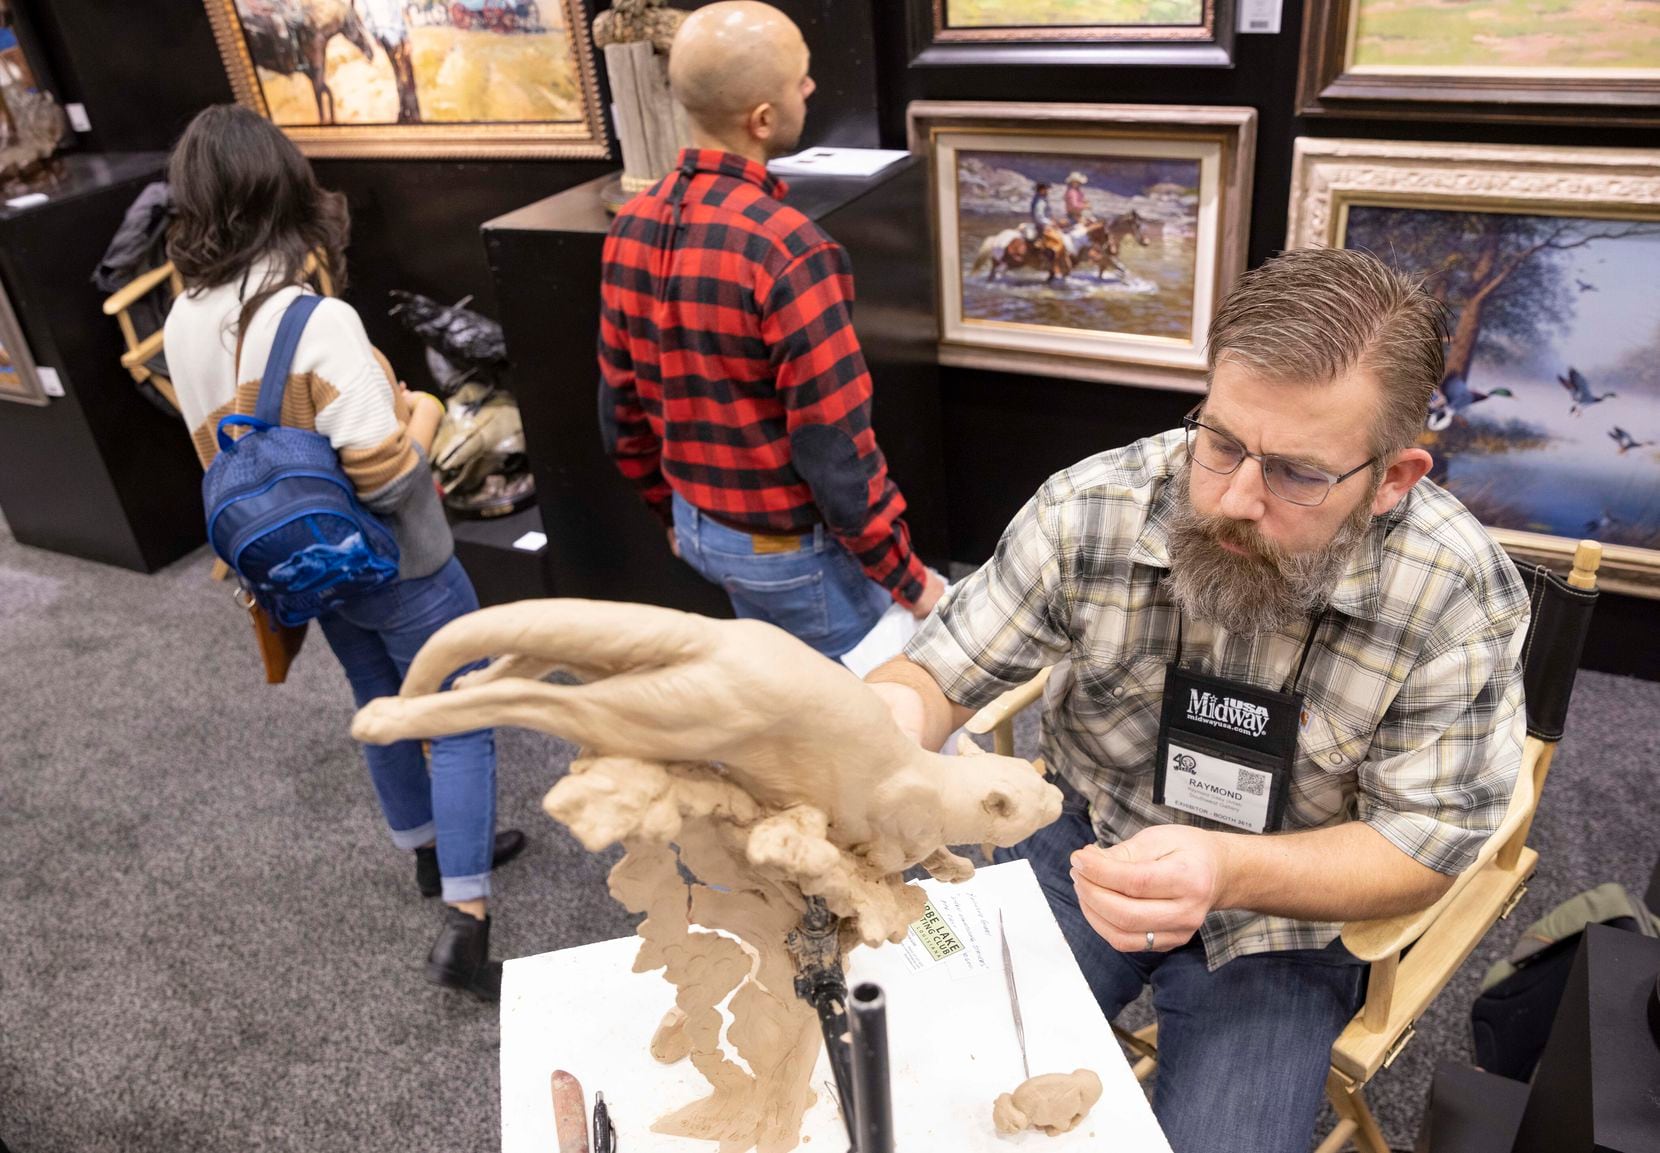 Raymond Gibby of Utah worked on a sculpture as people browsed the Southwest Gallery booth during the Dallas Safari Club Convention and Sporting Expo at Kay Bailey Hutchison Convention Center in Dallas on Jan. 7, 2022.